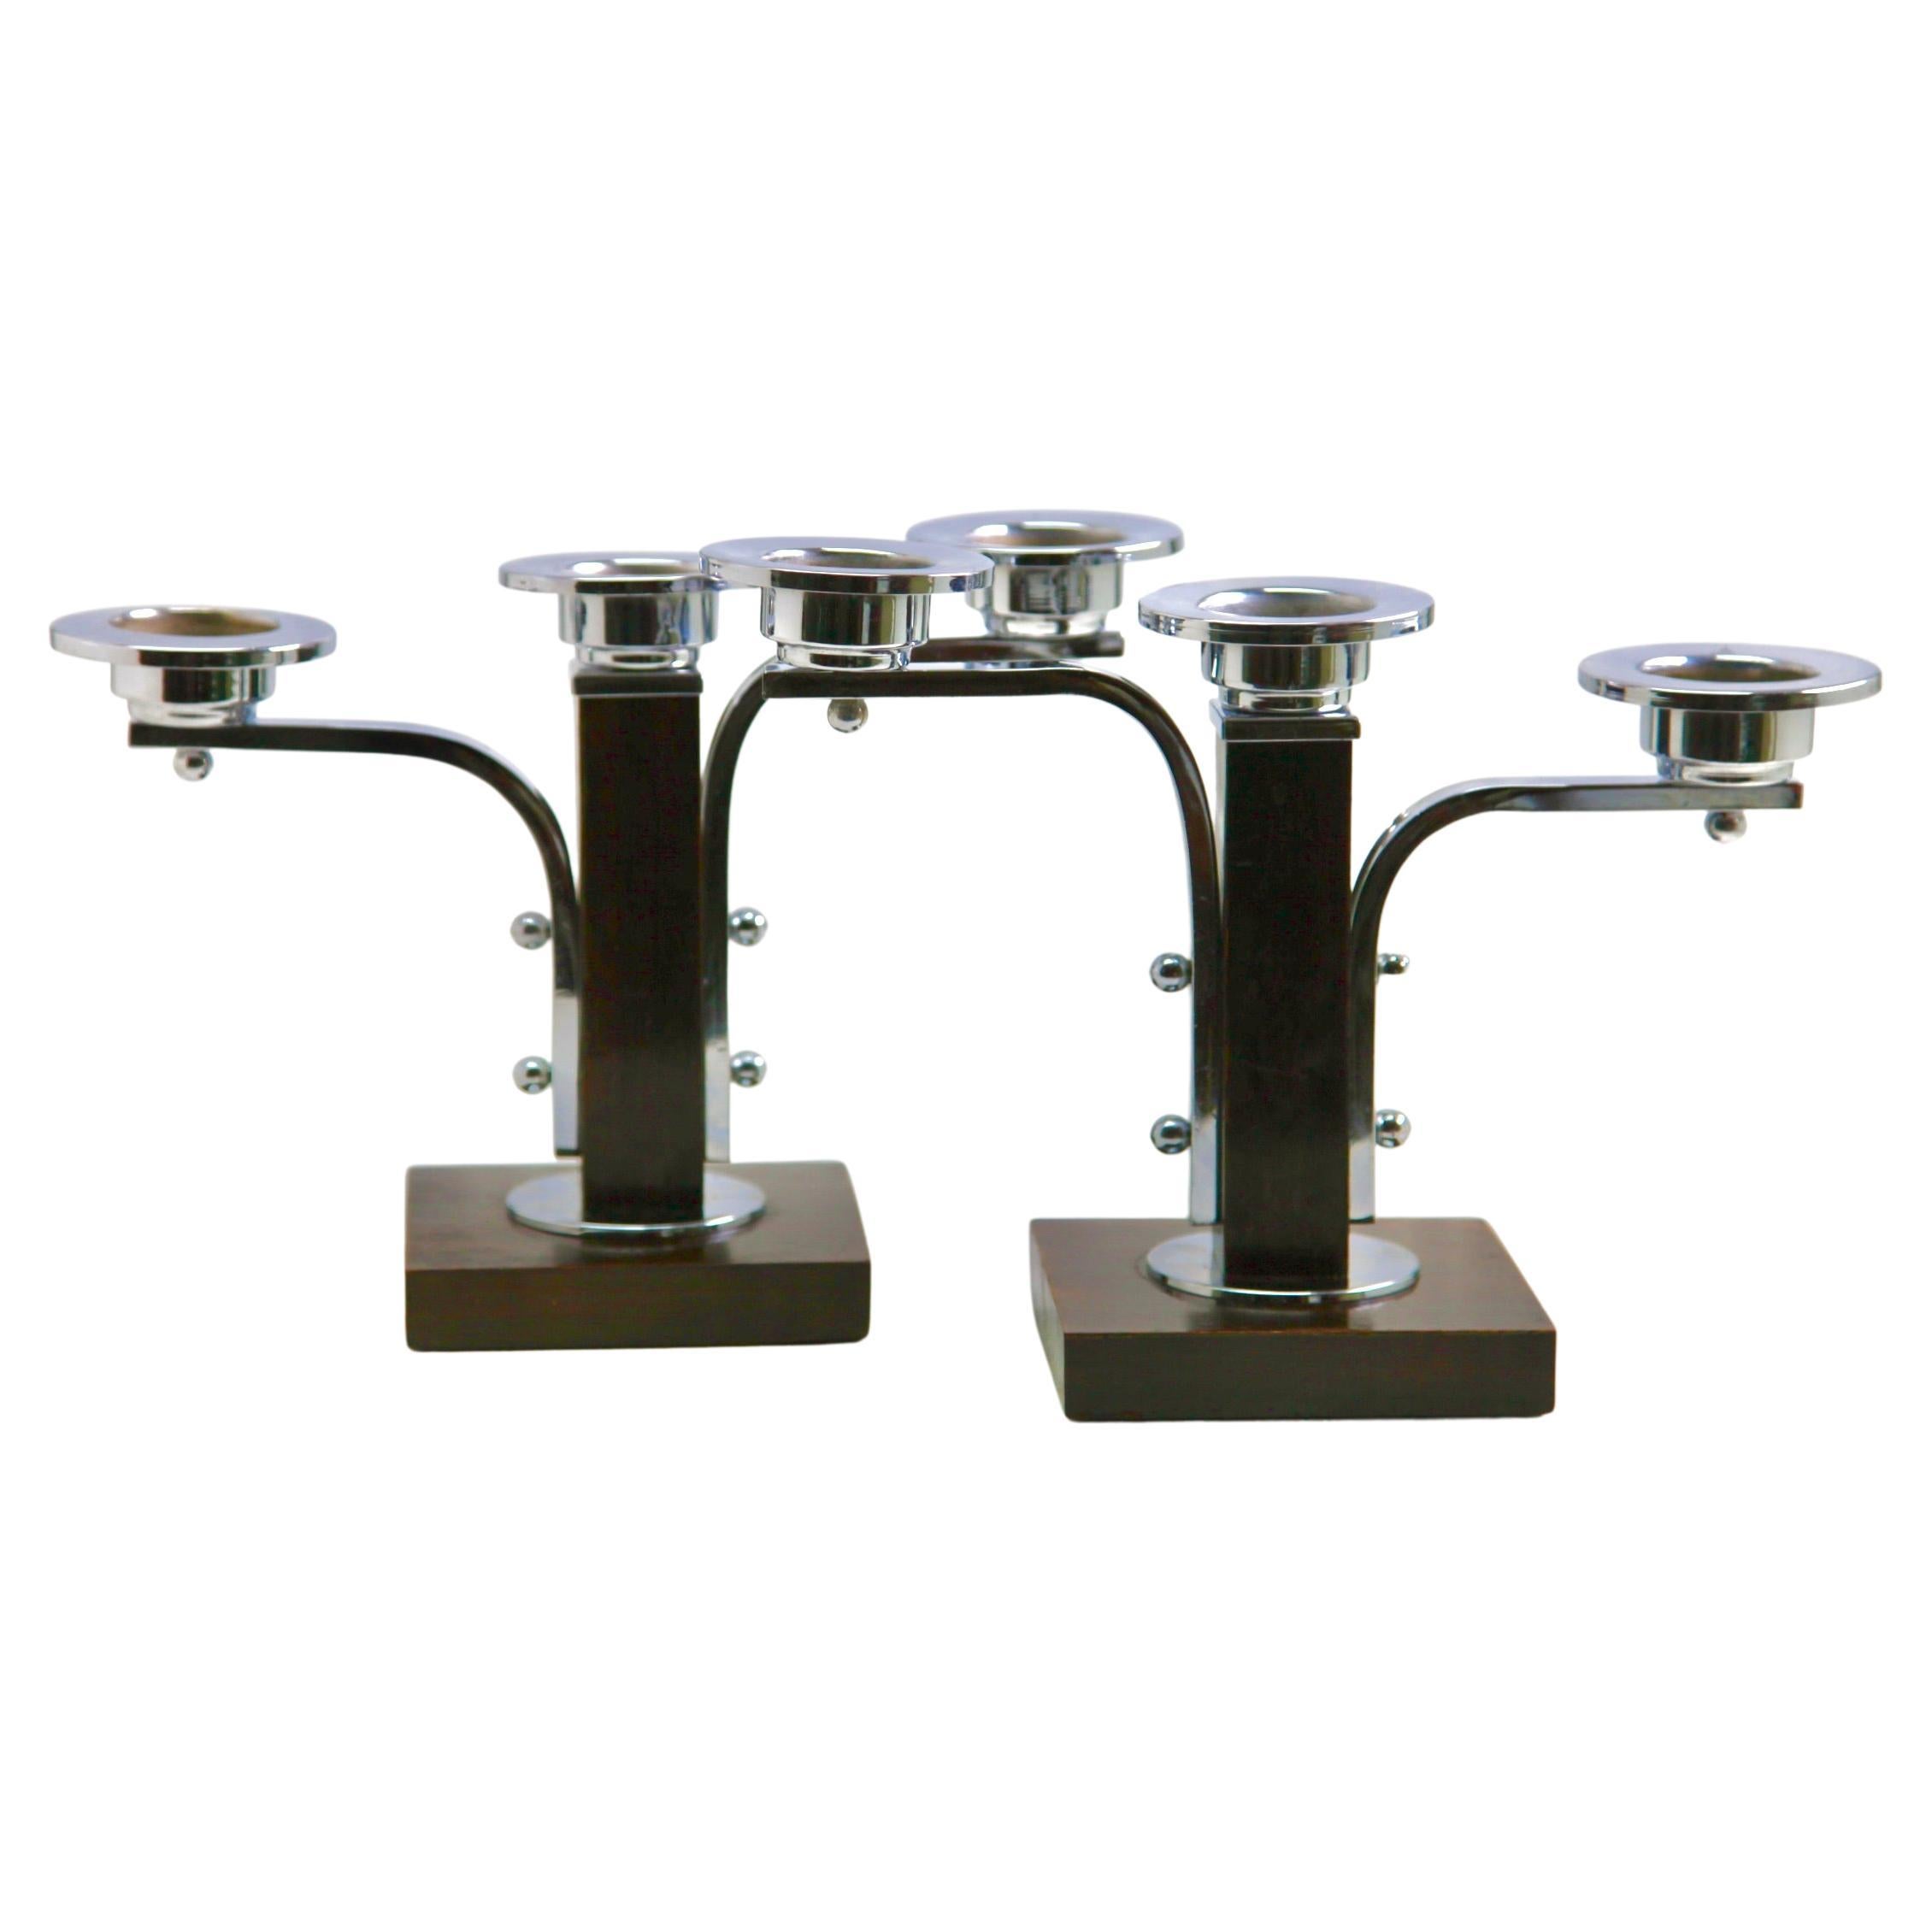 Art Deco Wooden and Chrome Pair of Candlesticks, 1930s